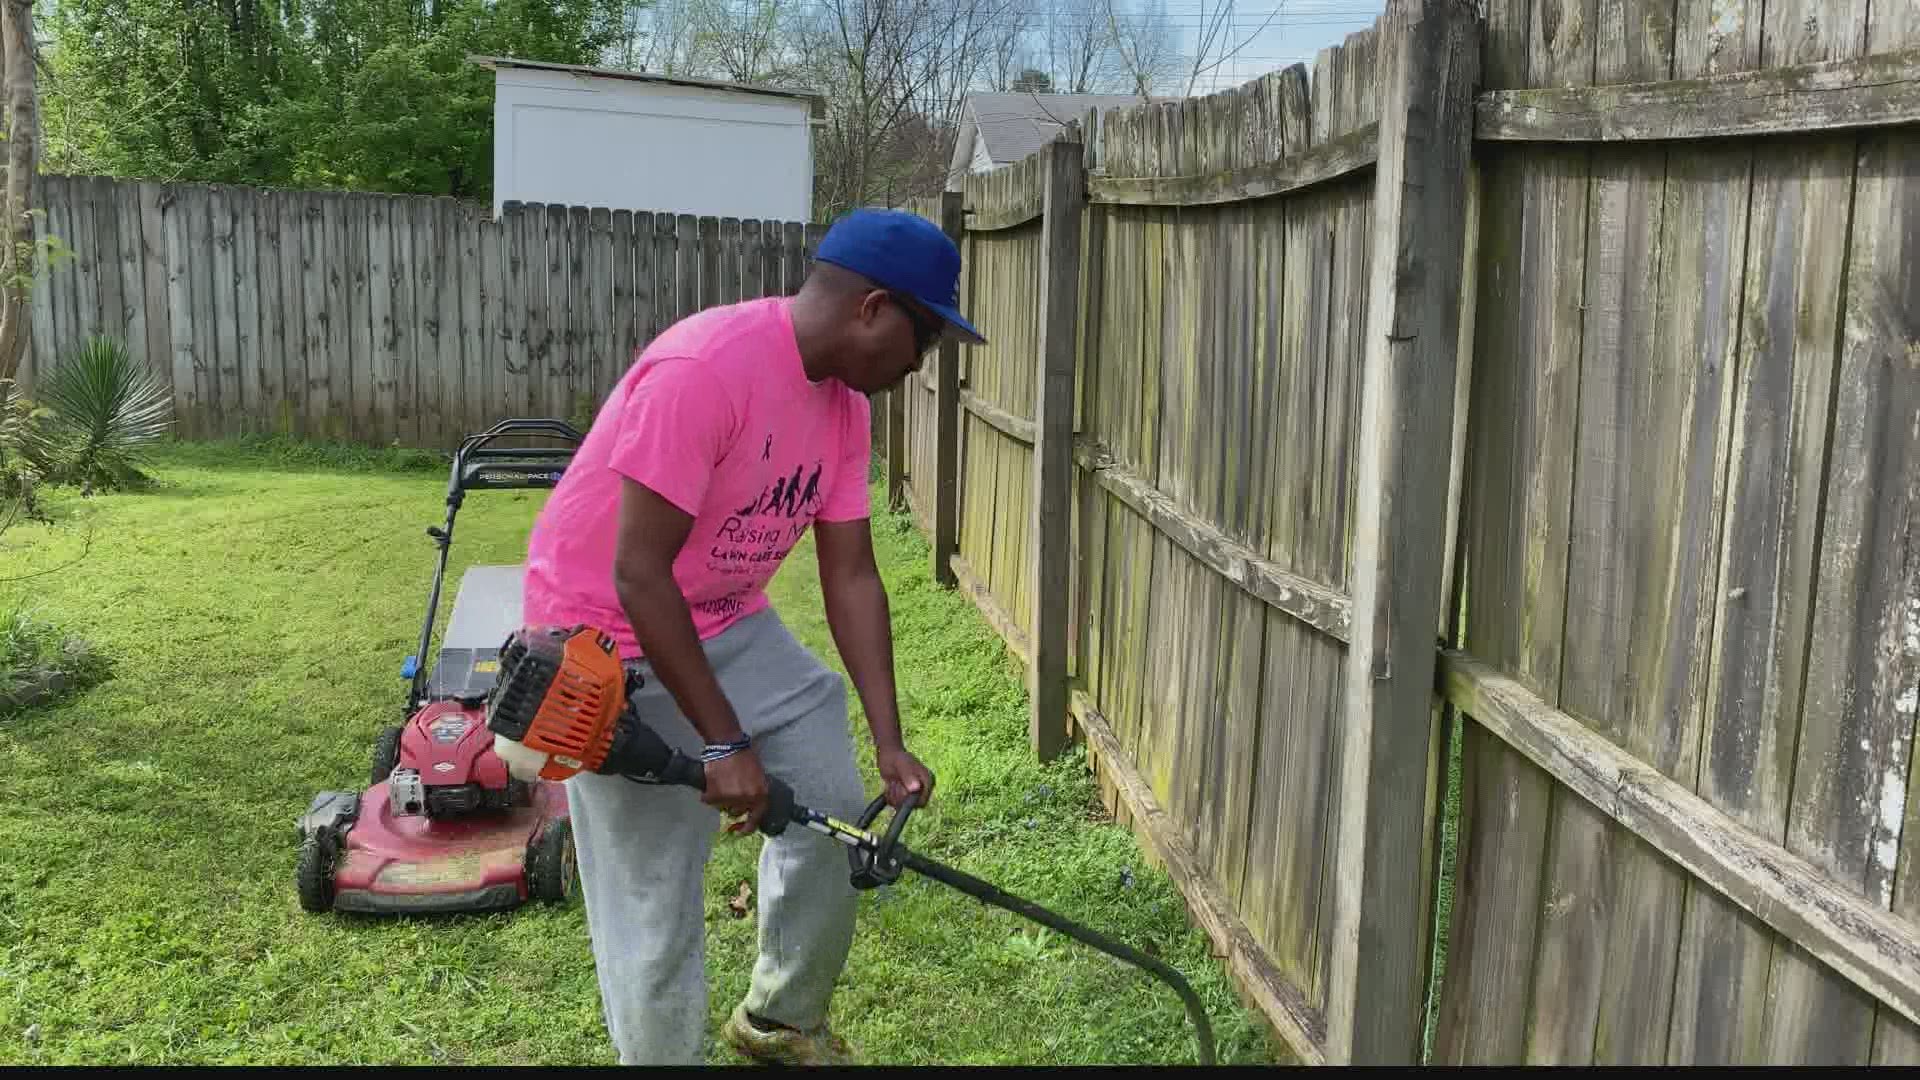 Huntsville's very own Rodney Smith is at it again, showing love to others.